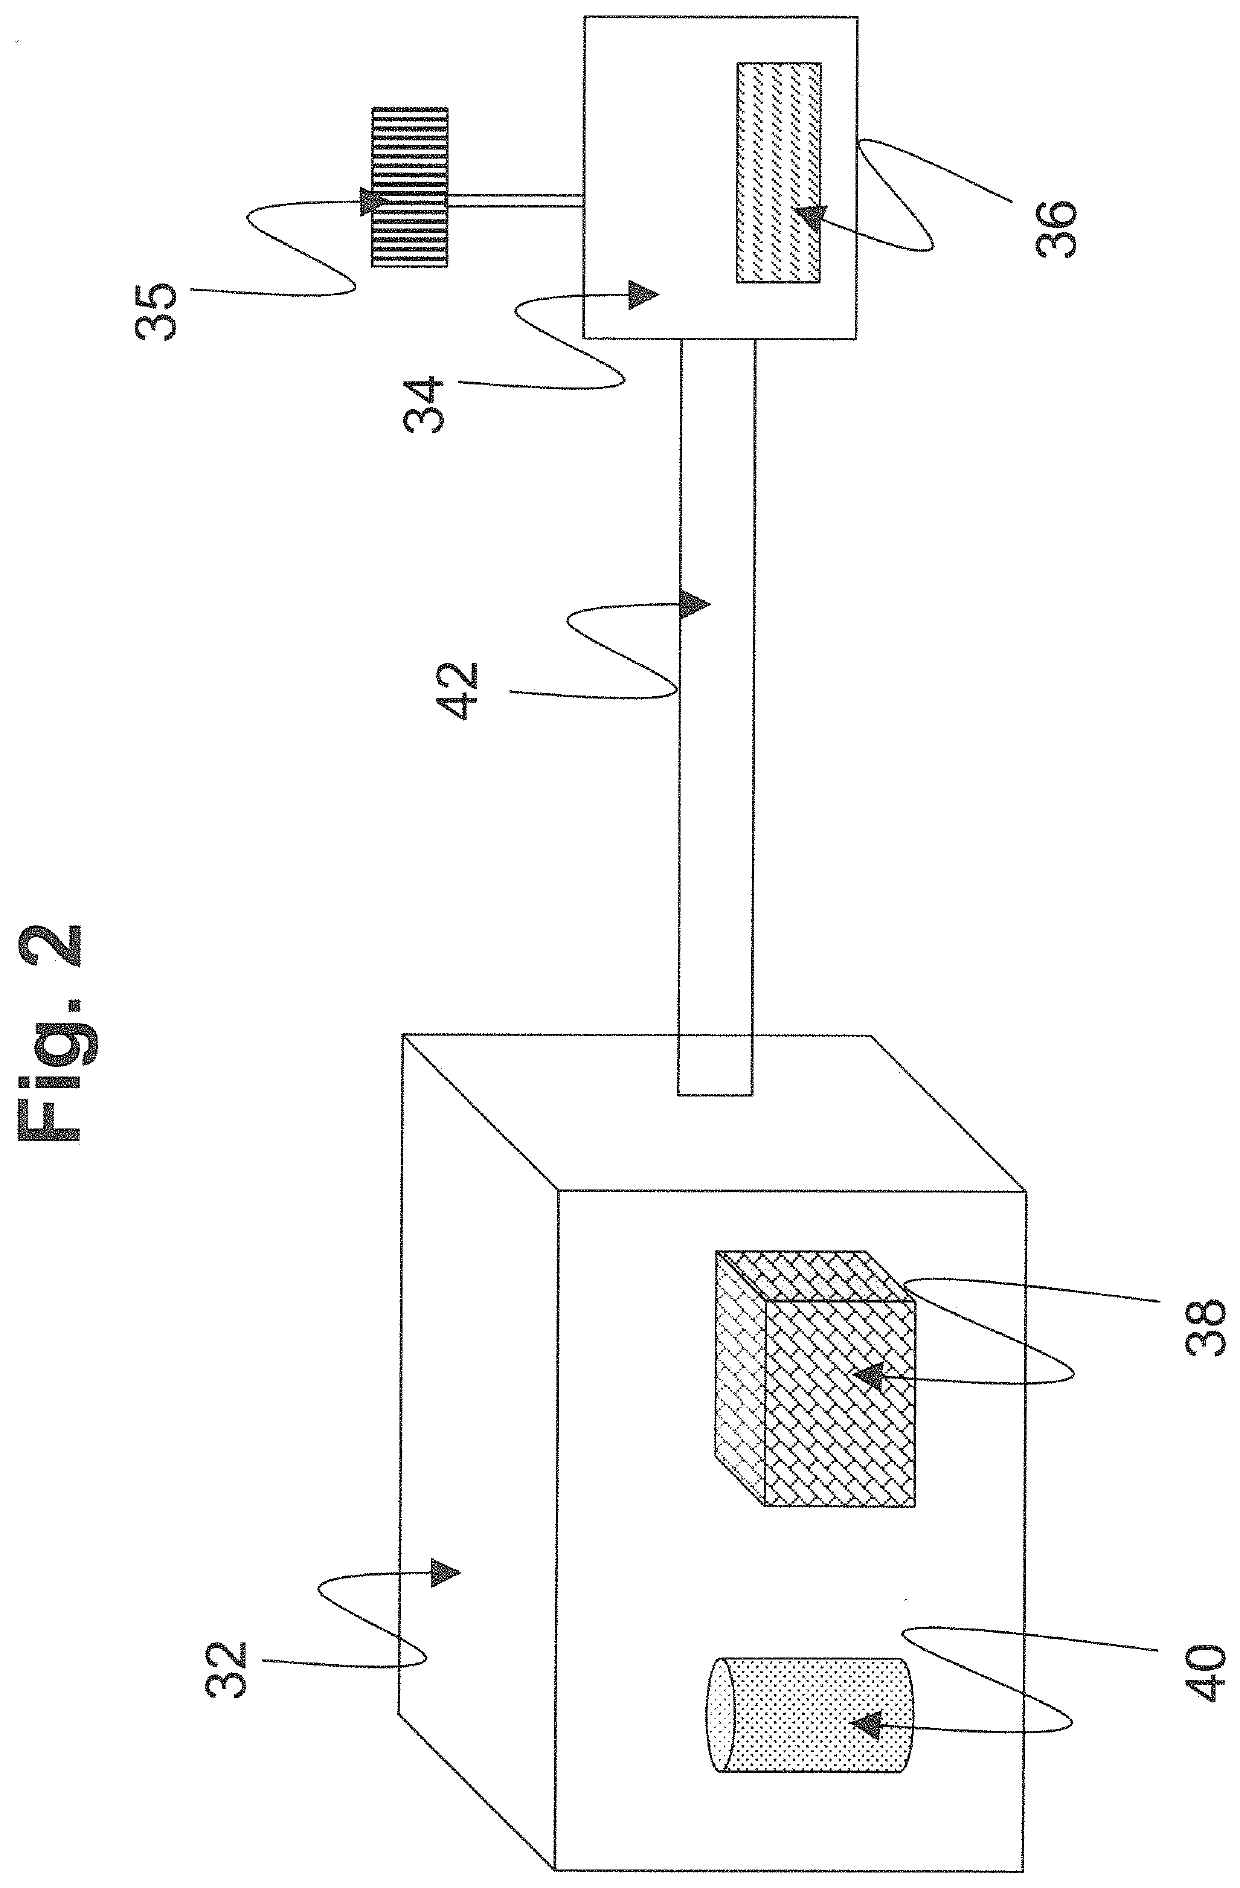 Adpative droplet operations in an AM-EWOD device based on test measurement of droplet properties